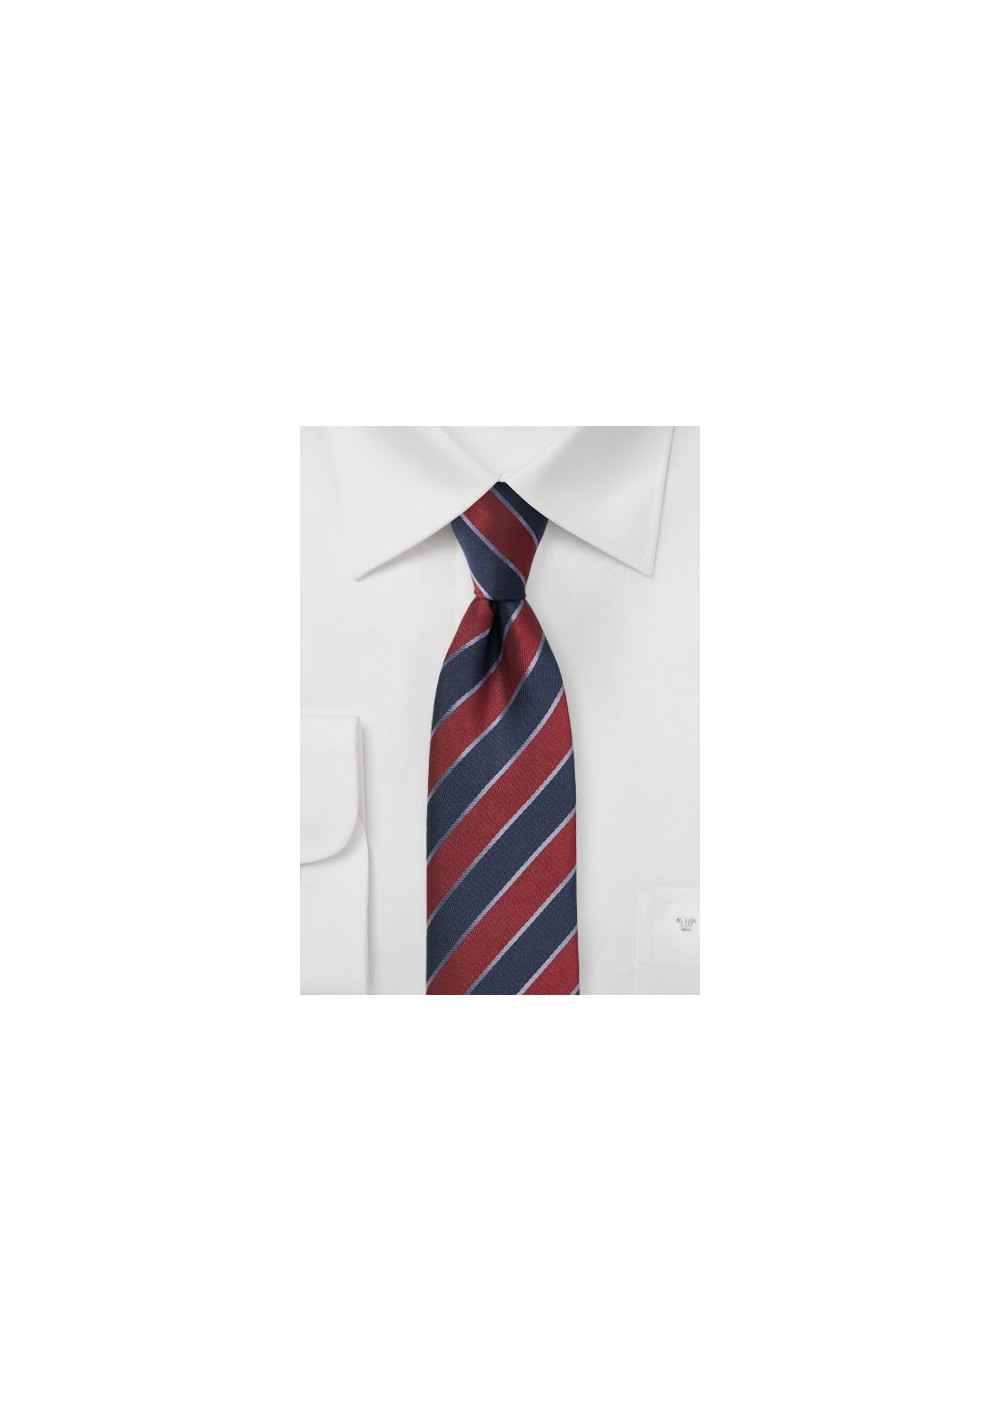 Striped Skinny Tie in Wine Red and Navy